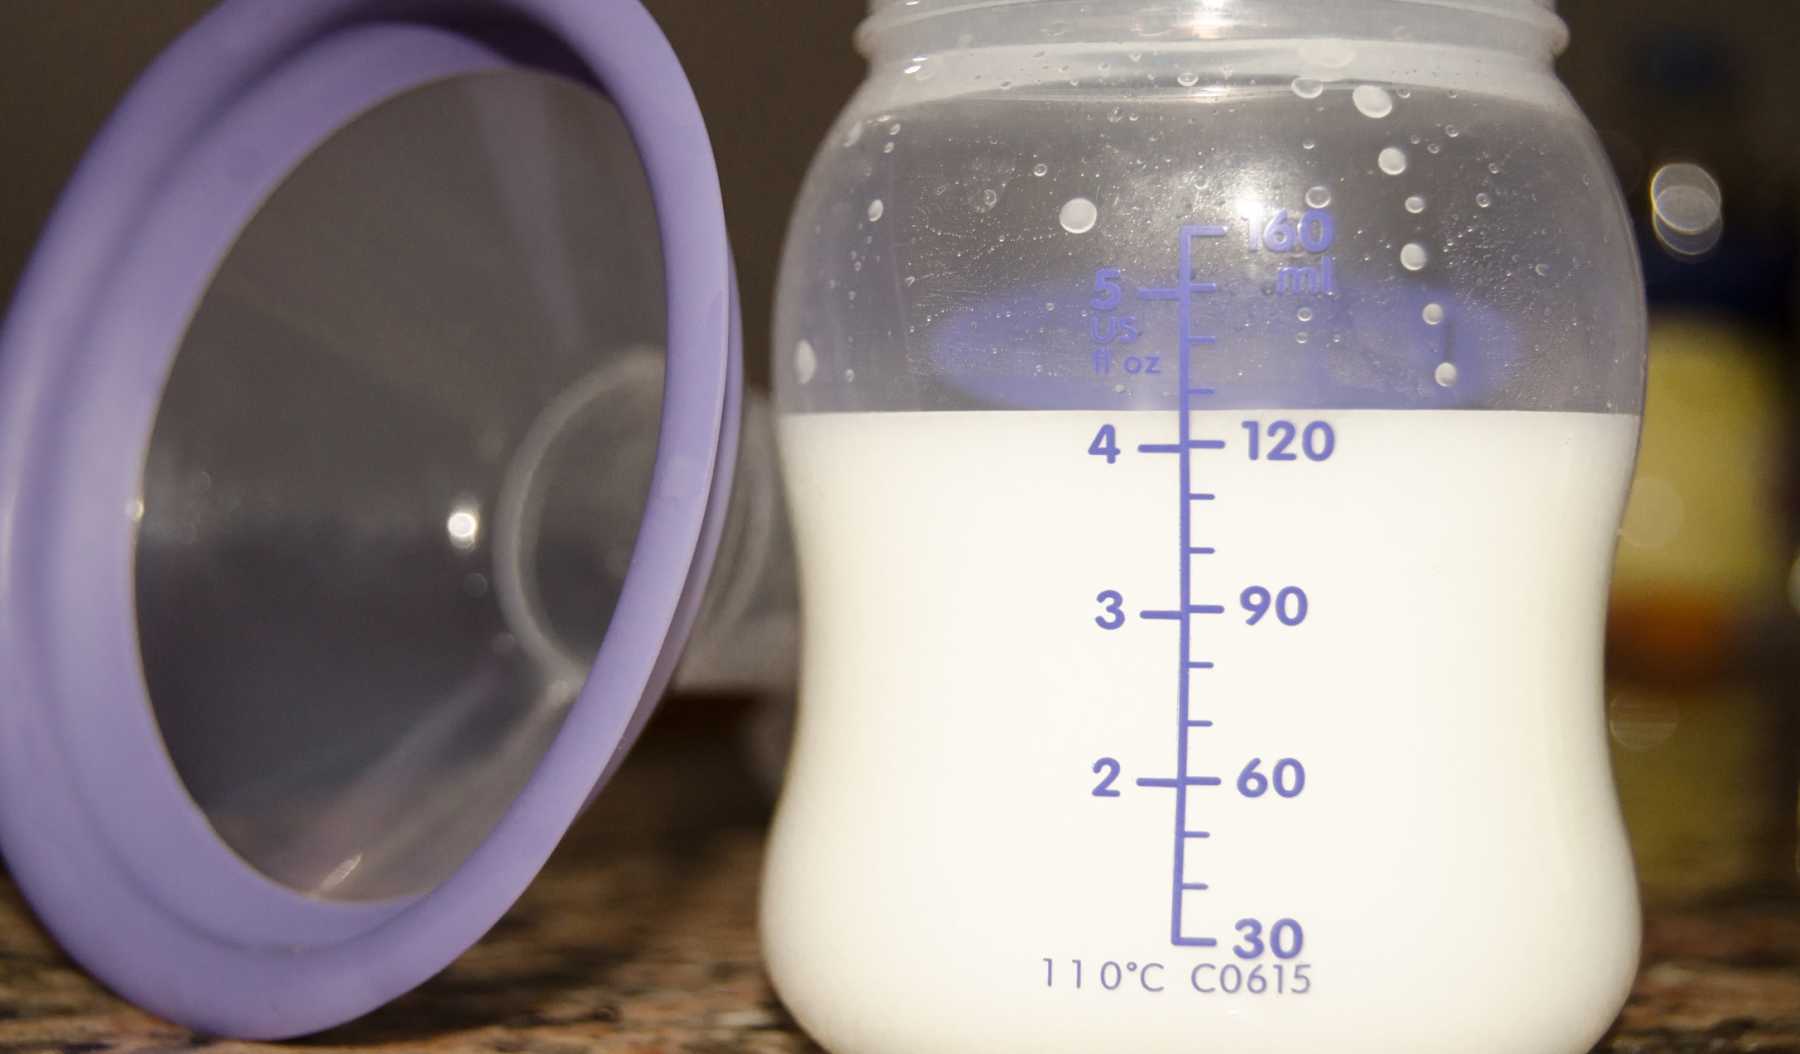 Pumping Breast Milk 101: What You Need to Know